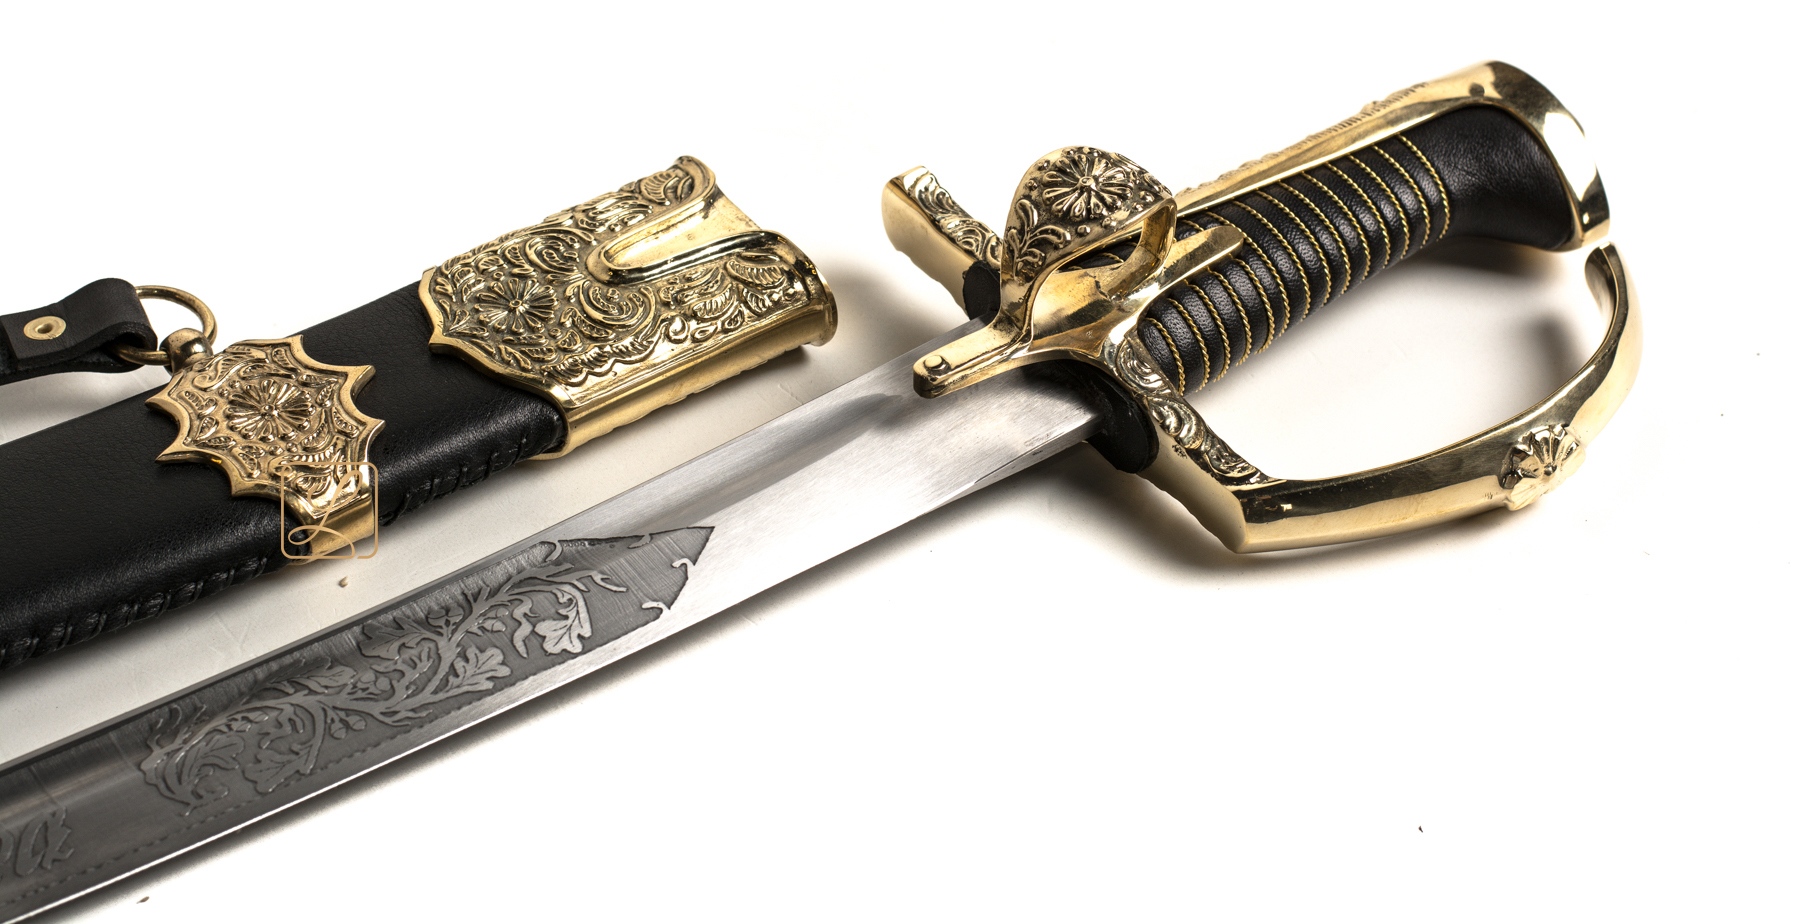 Hussar saber with scabbard, second half 17th century, blade forged, hardened. A unique gift!